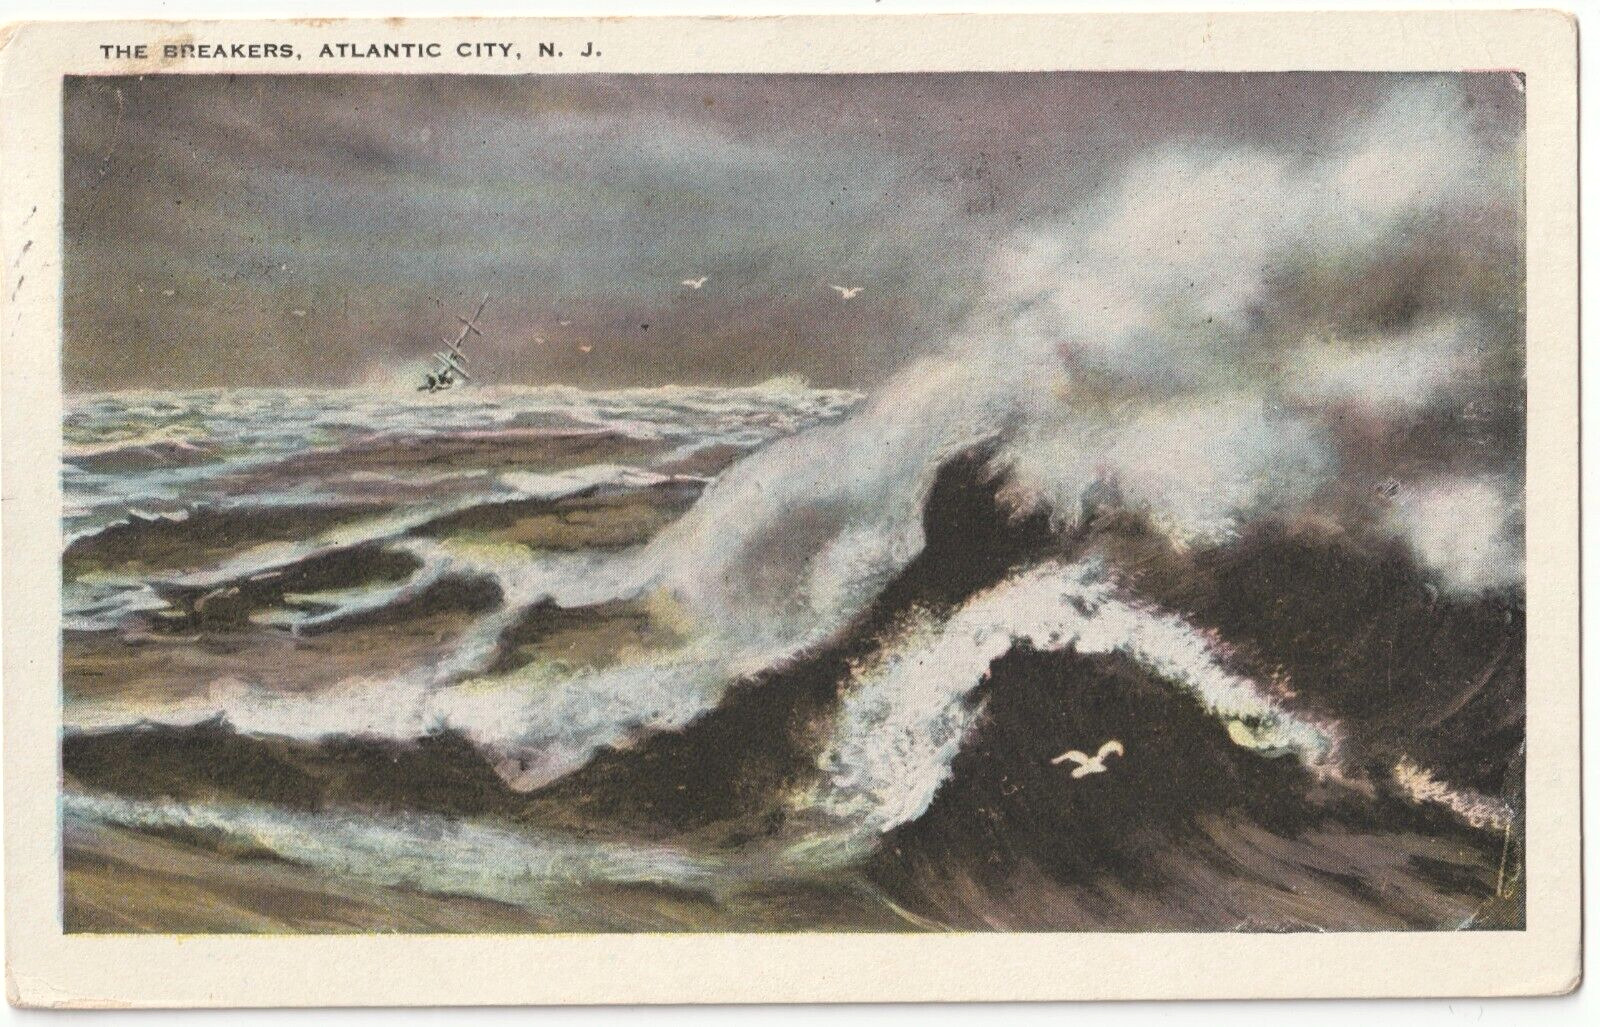 The Breakers with Ship-Atlantic City, New Jersey-1923 posted postcard